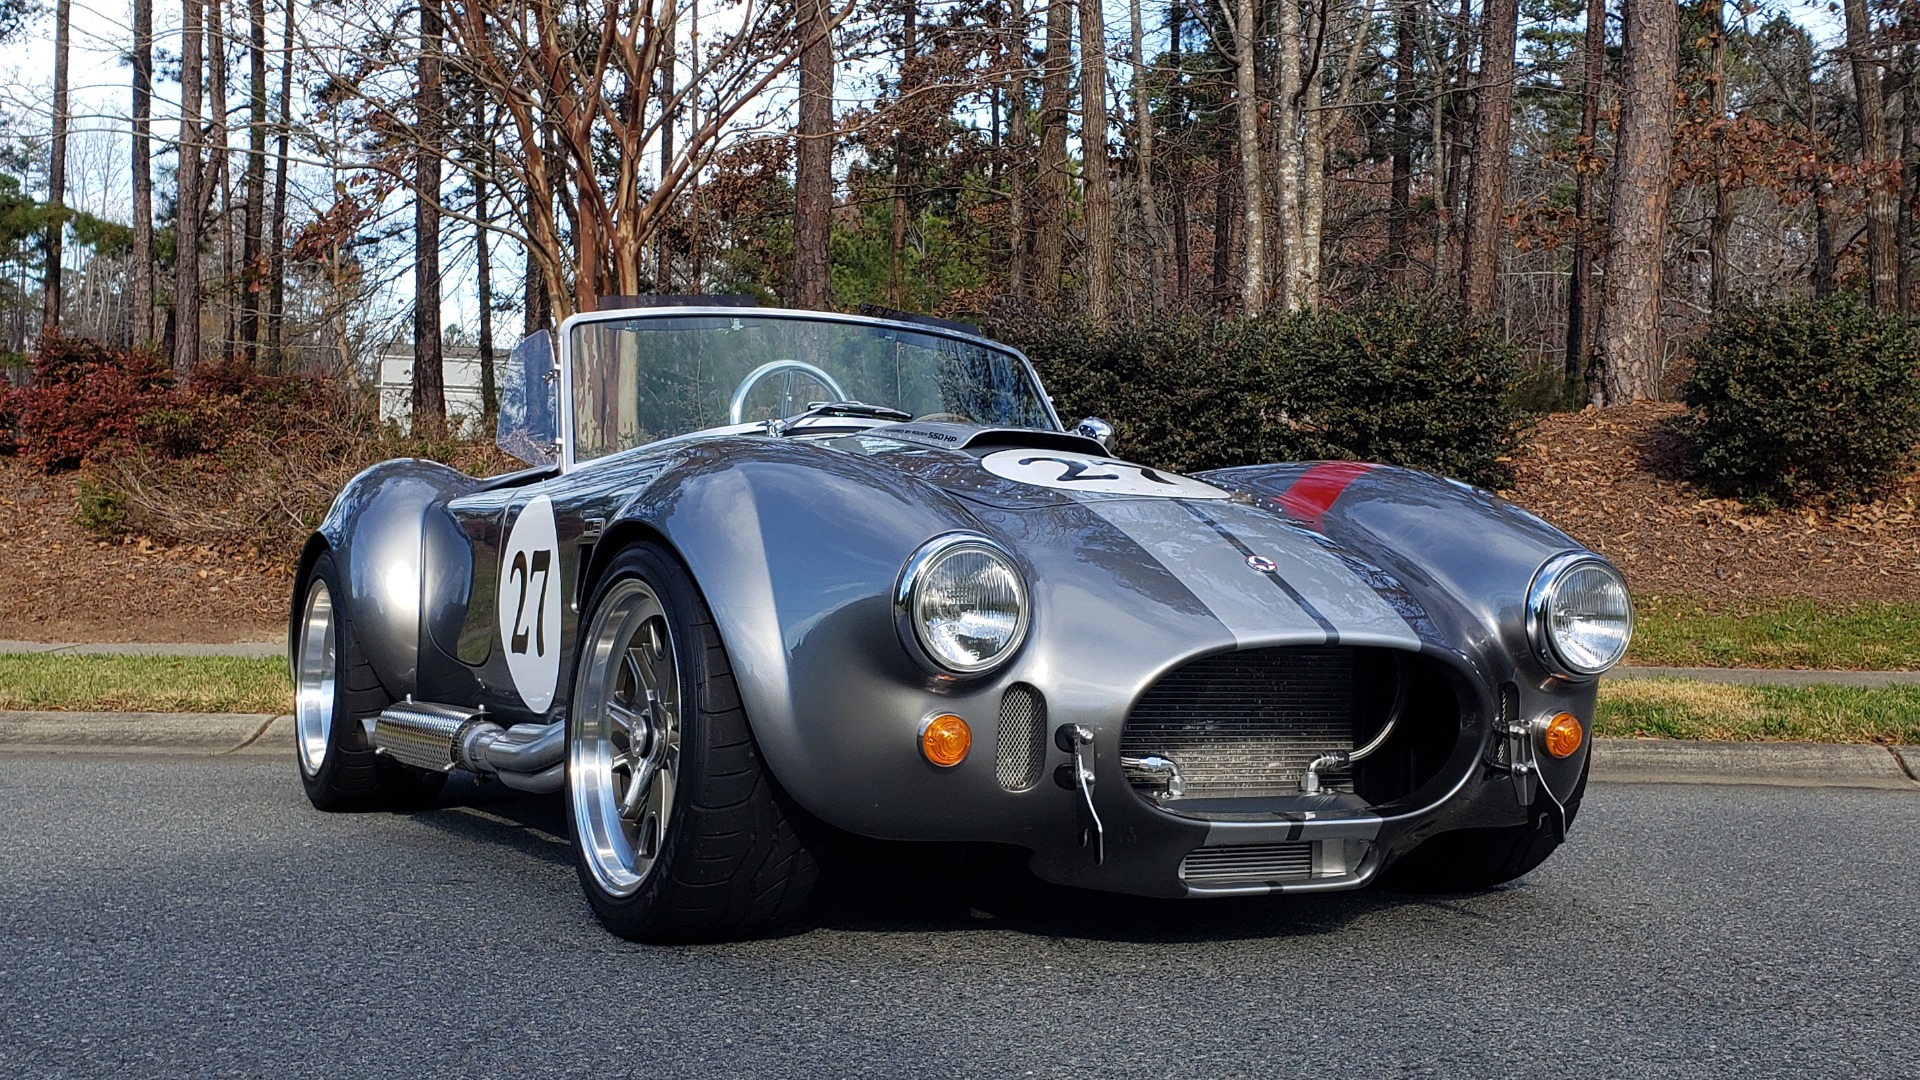 Used 1965 Ford COBRA 427 ROADSTER BY BACKDRAFT RACING ROUSH 553HP V8 / TREMEC 6-SPD / PWR STRNG for sale Sold at Formula Imports in Charlotte NC 28227 6